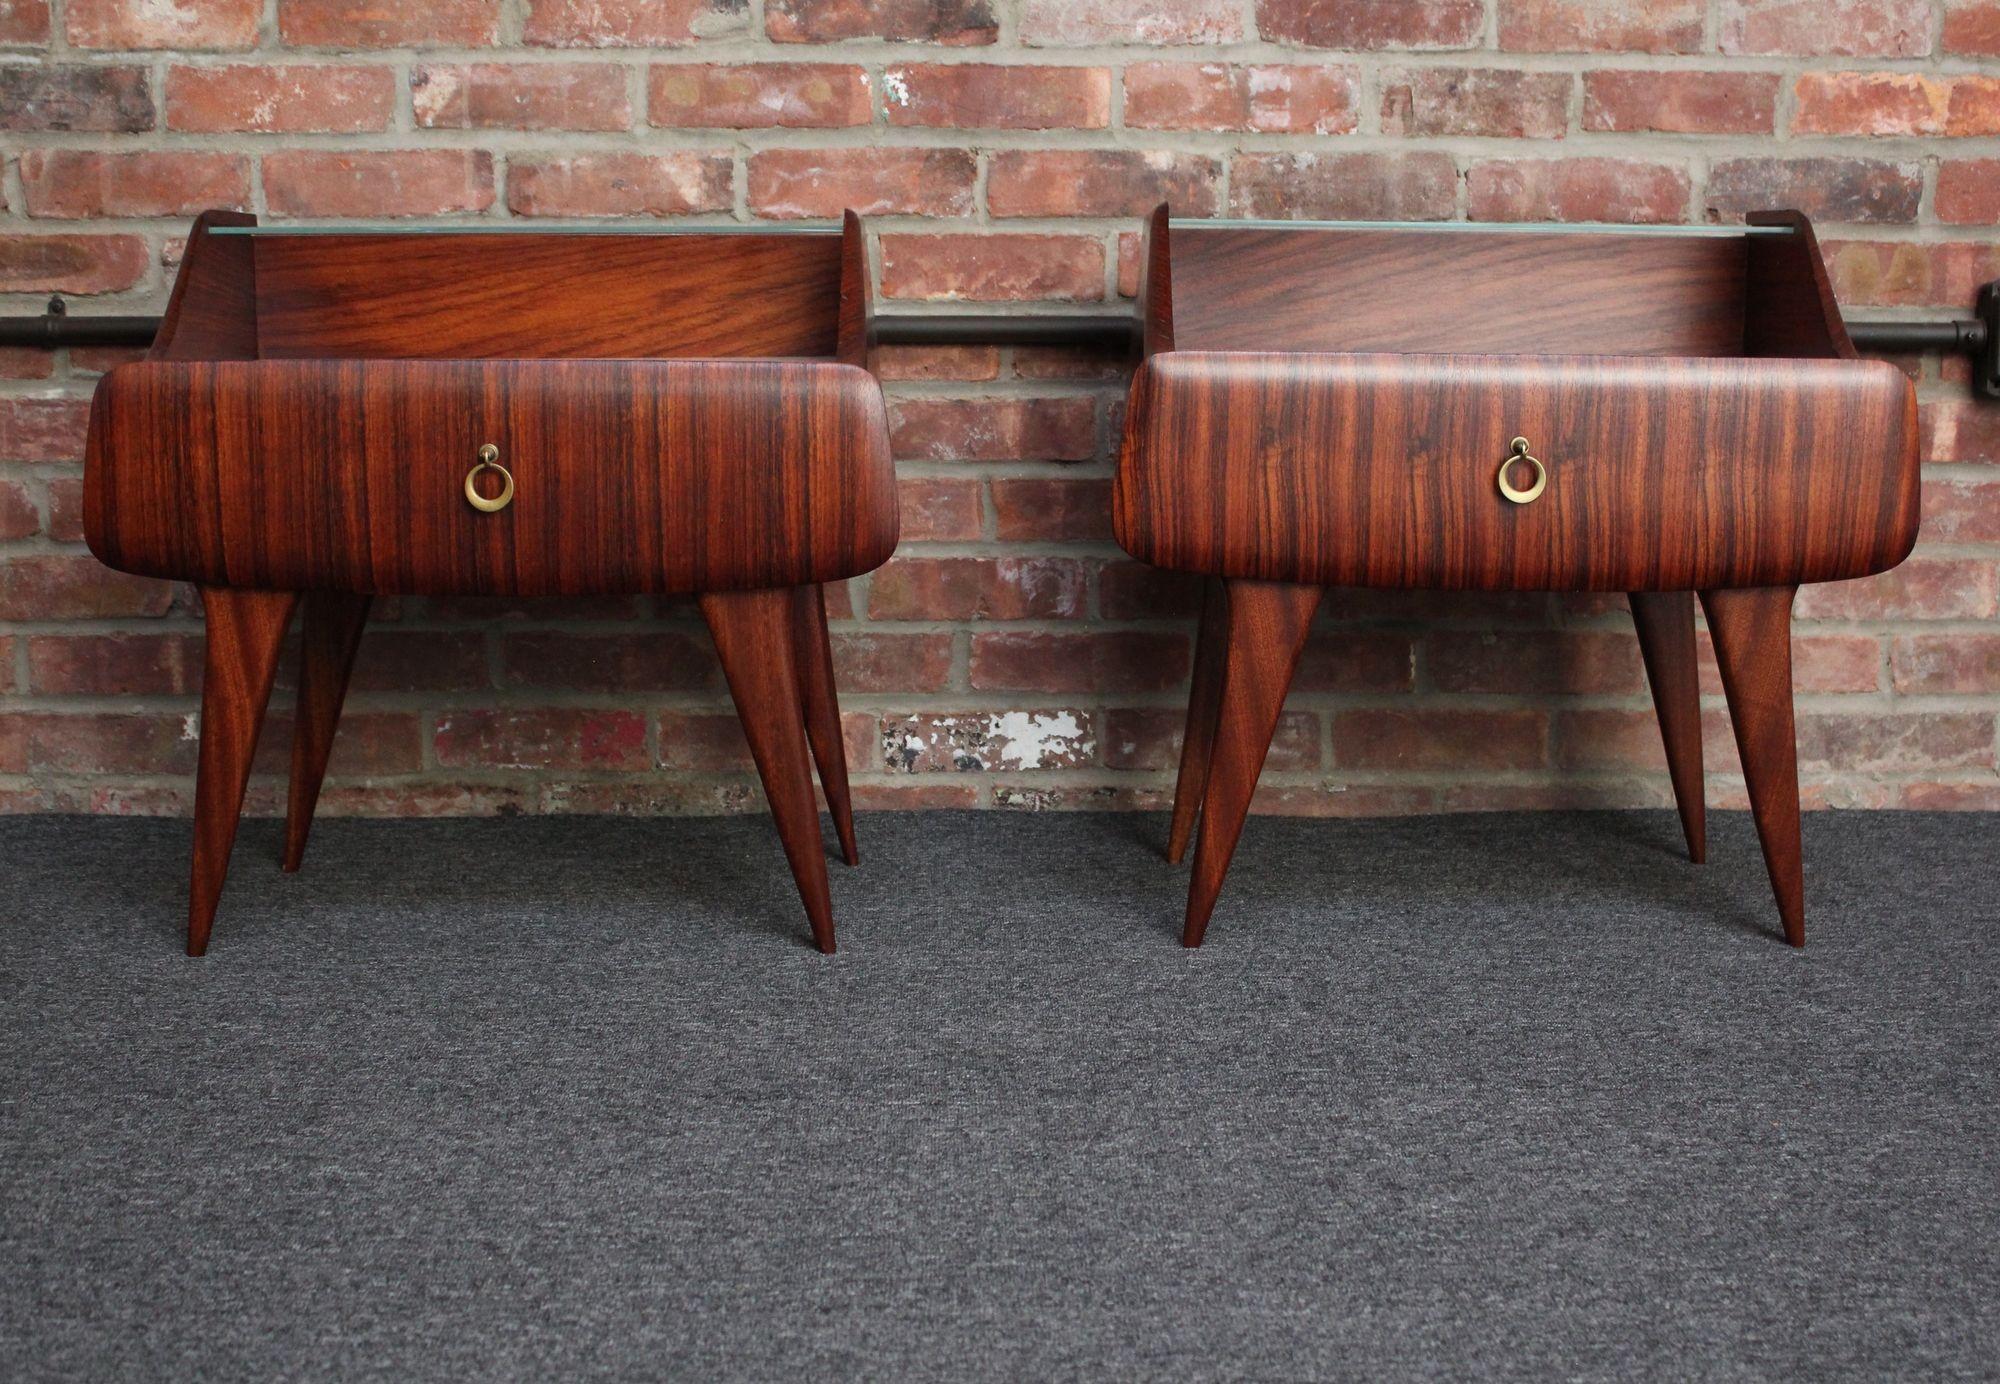 Pair of rosewood nightstands/bedside tables with single drawers and brass pulls along with deeply sculpted, splayed legs (ca. 1950s, Italy). Ample surface spaces with split level tempered glass and glass covered white laminate tops.
Very good, newly